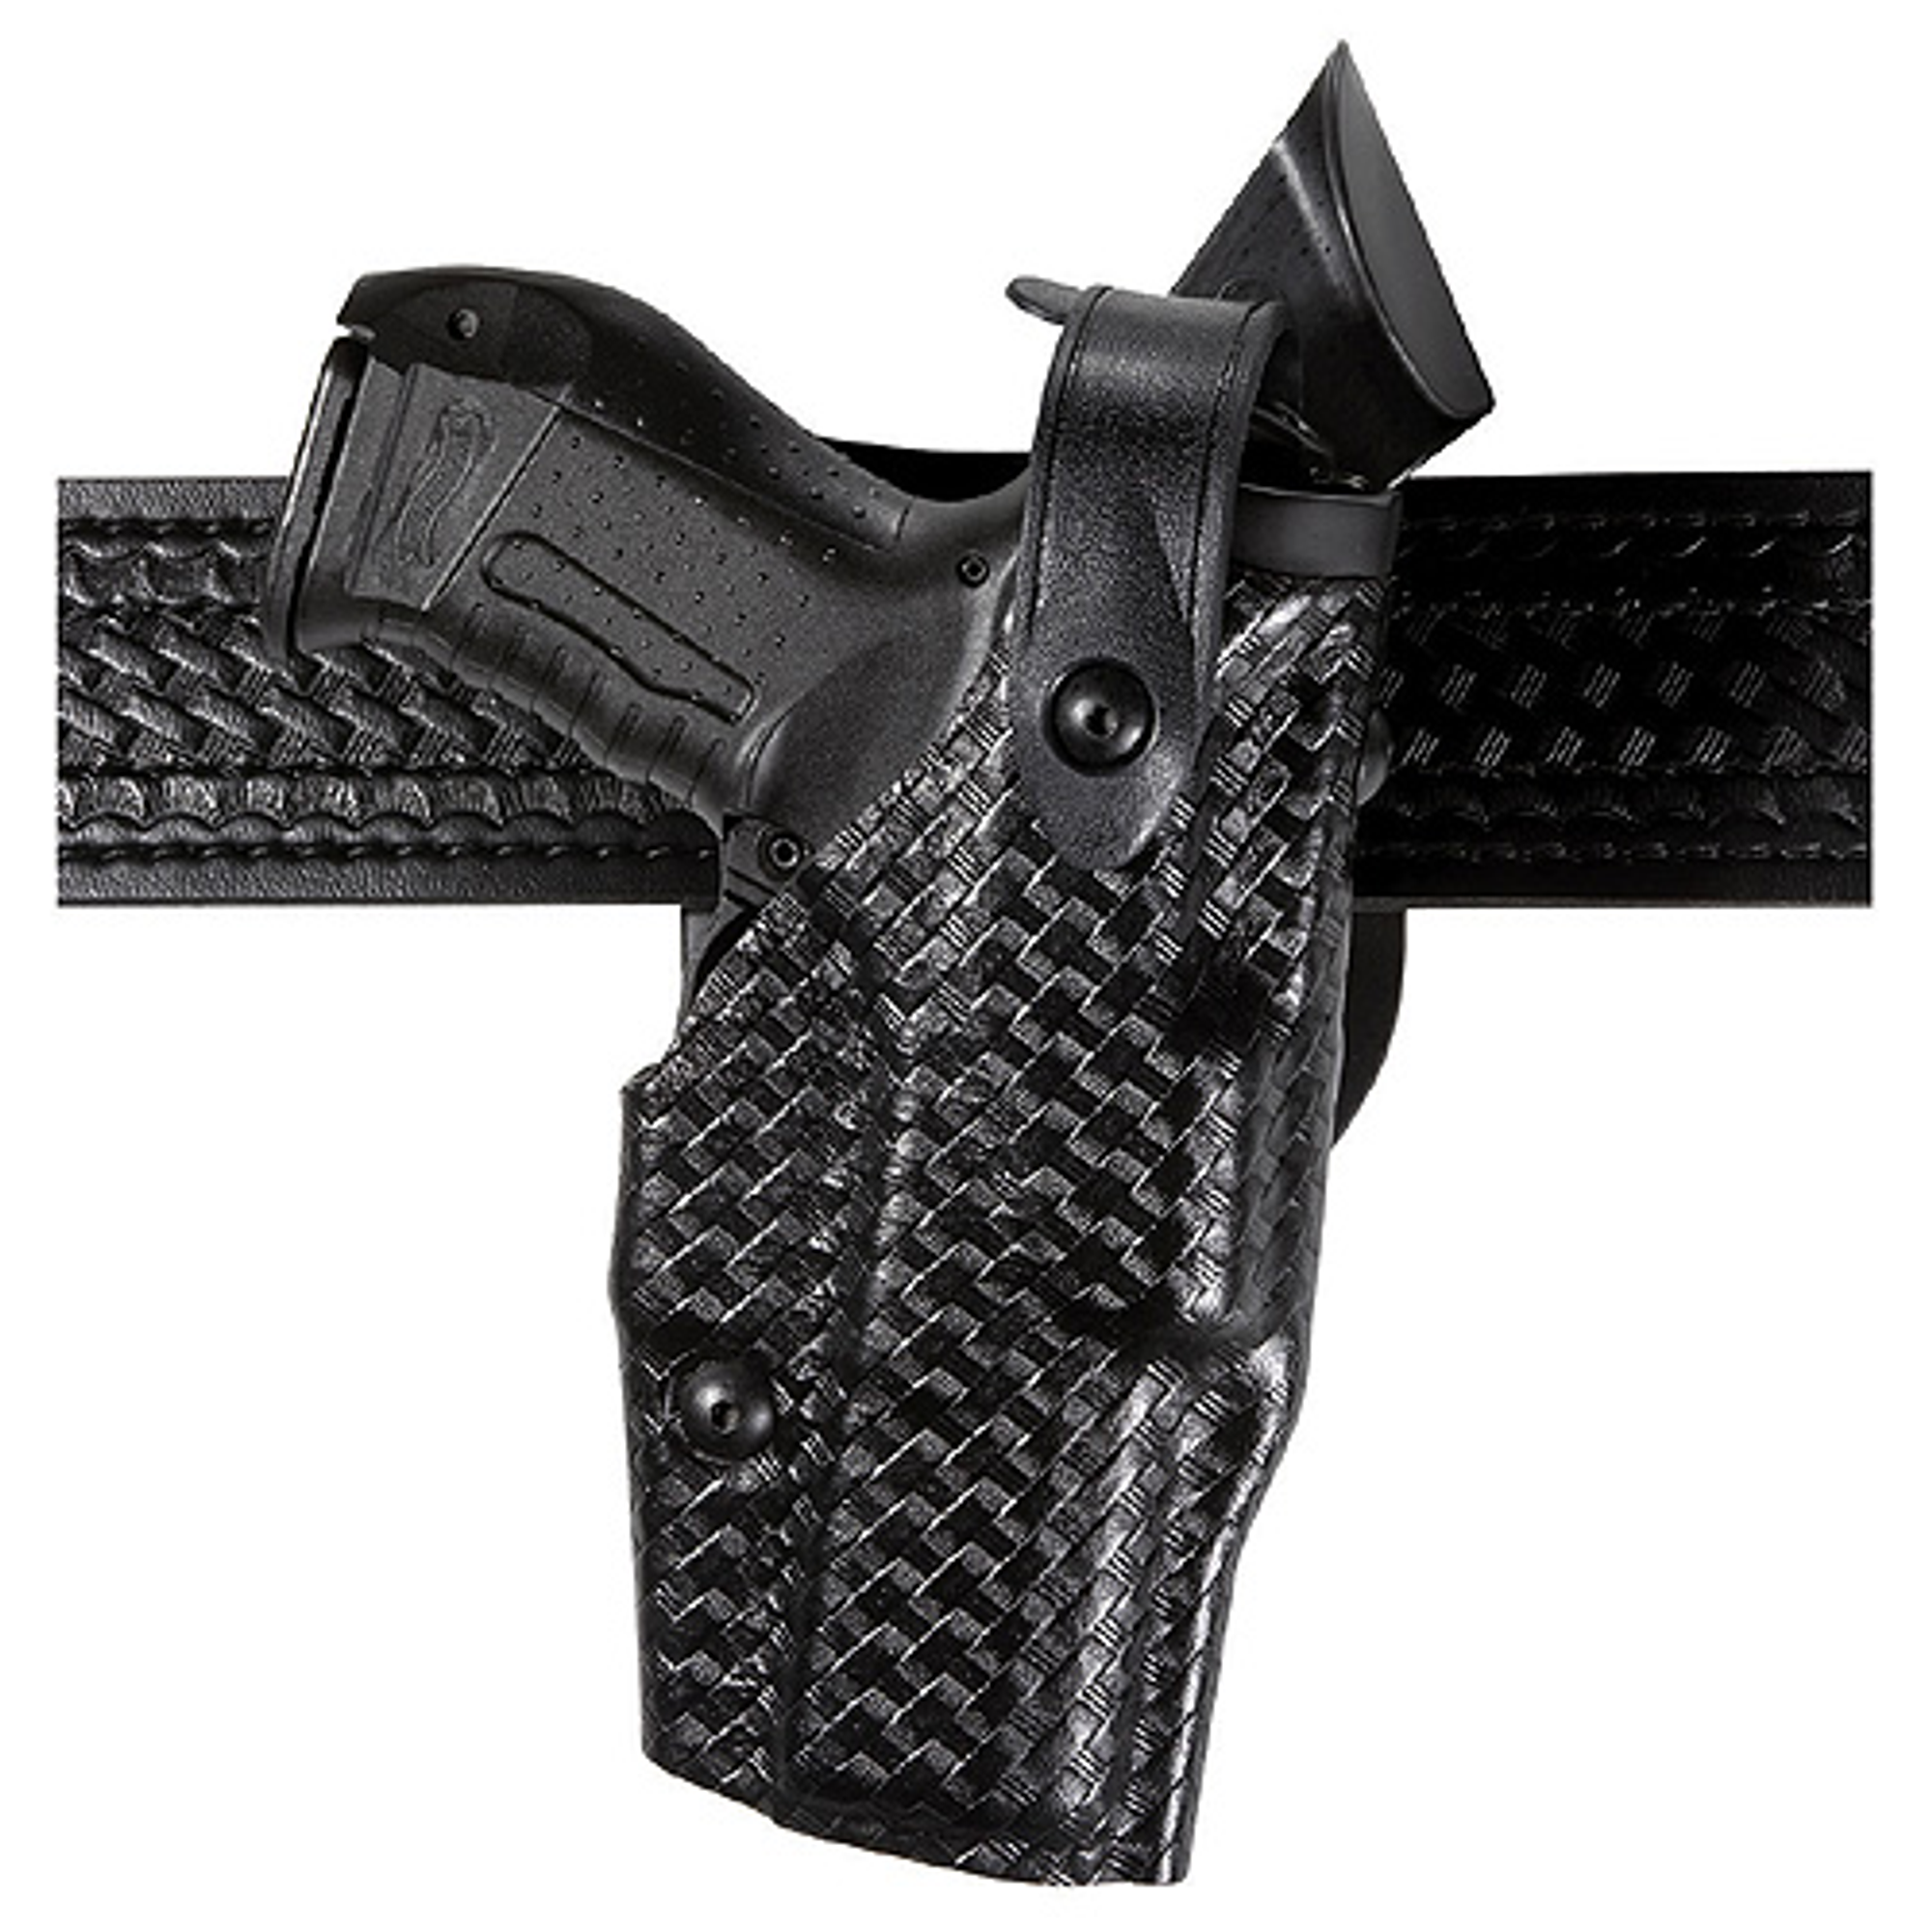 Model 6360 Als/sls Mid-ride, Level Iii Retention Duty Holster For Smith & Wesson M&p 9 - KR6360-219-411